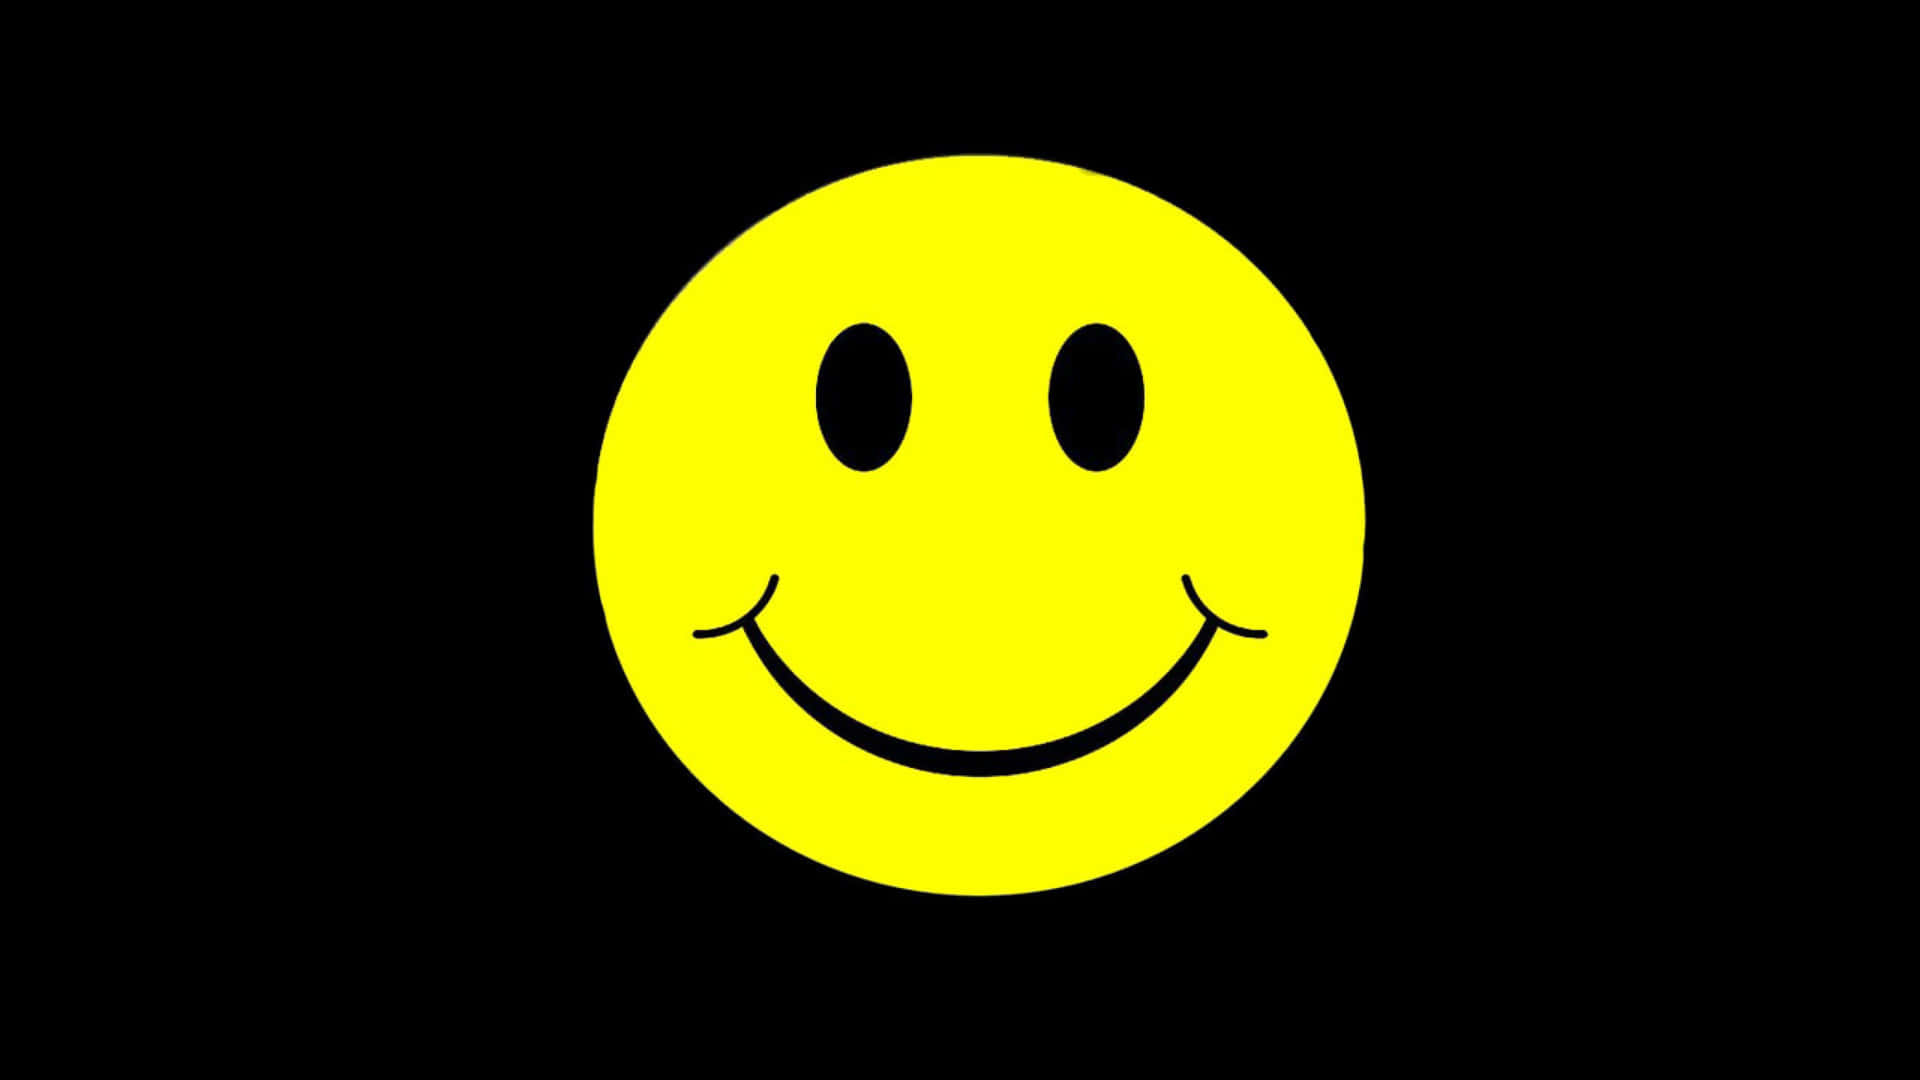 Cute Emoji With Happy Smile Face Wallpaper